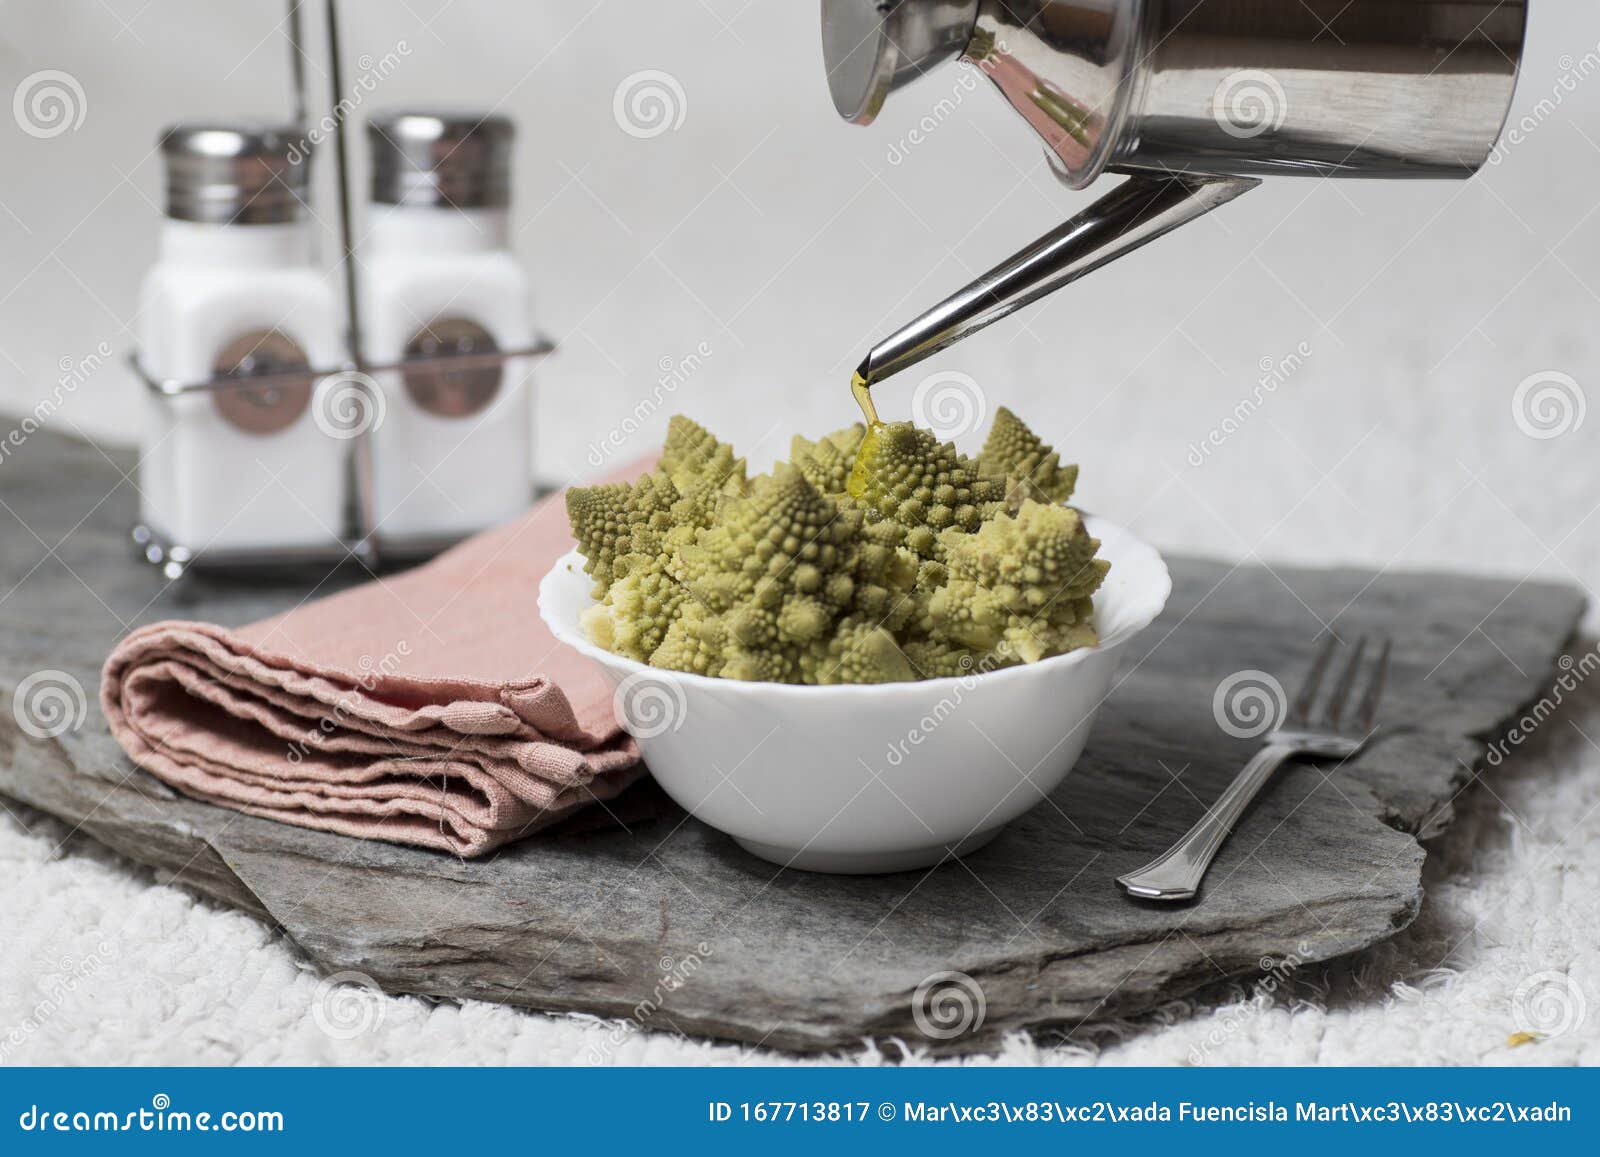 romanesco brecol in preparation to be cooked